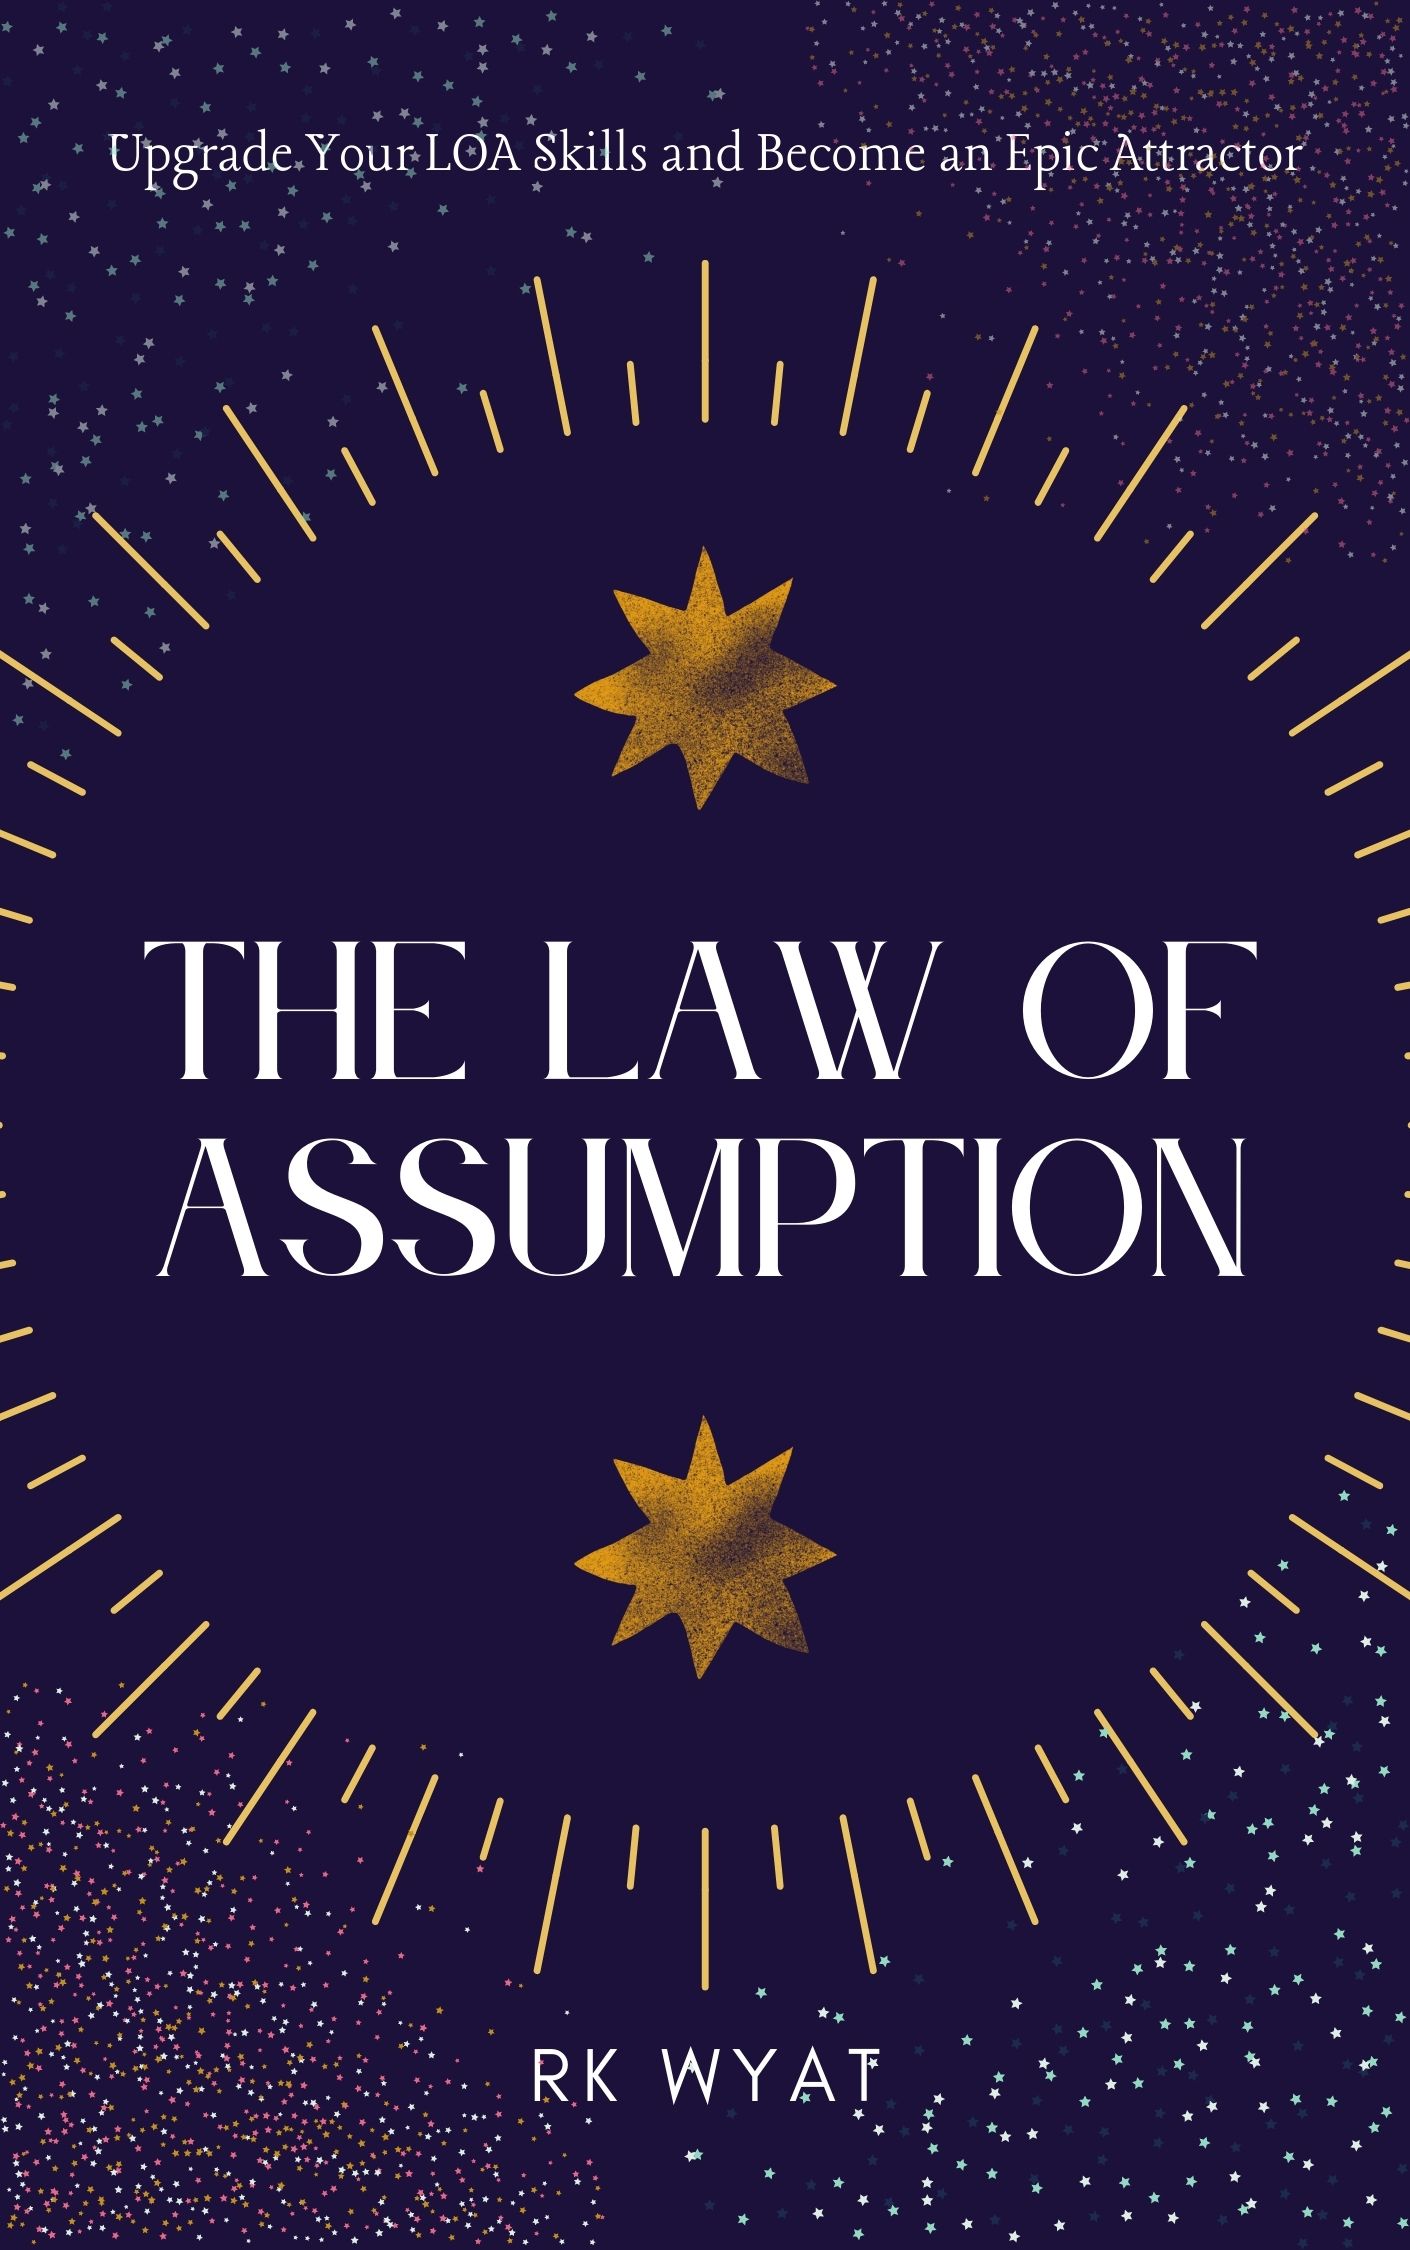 RK Wyat: The Law of Assumption